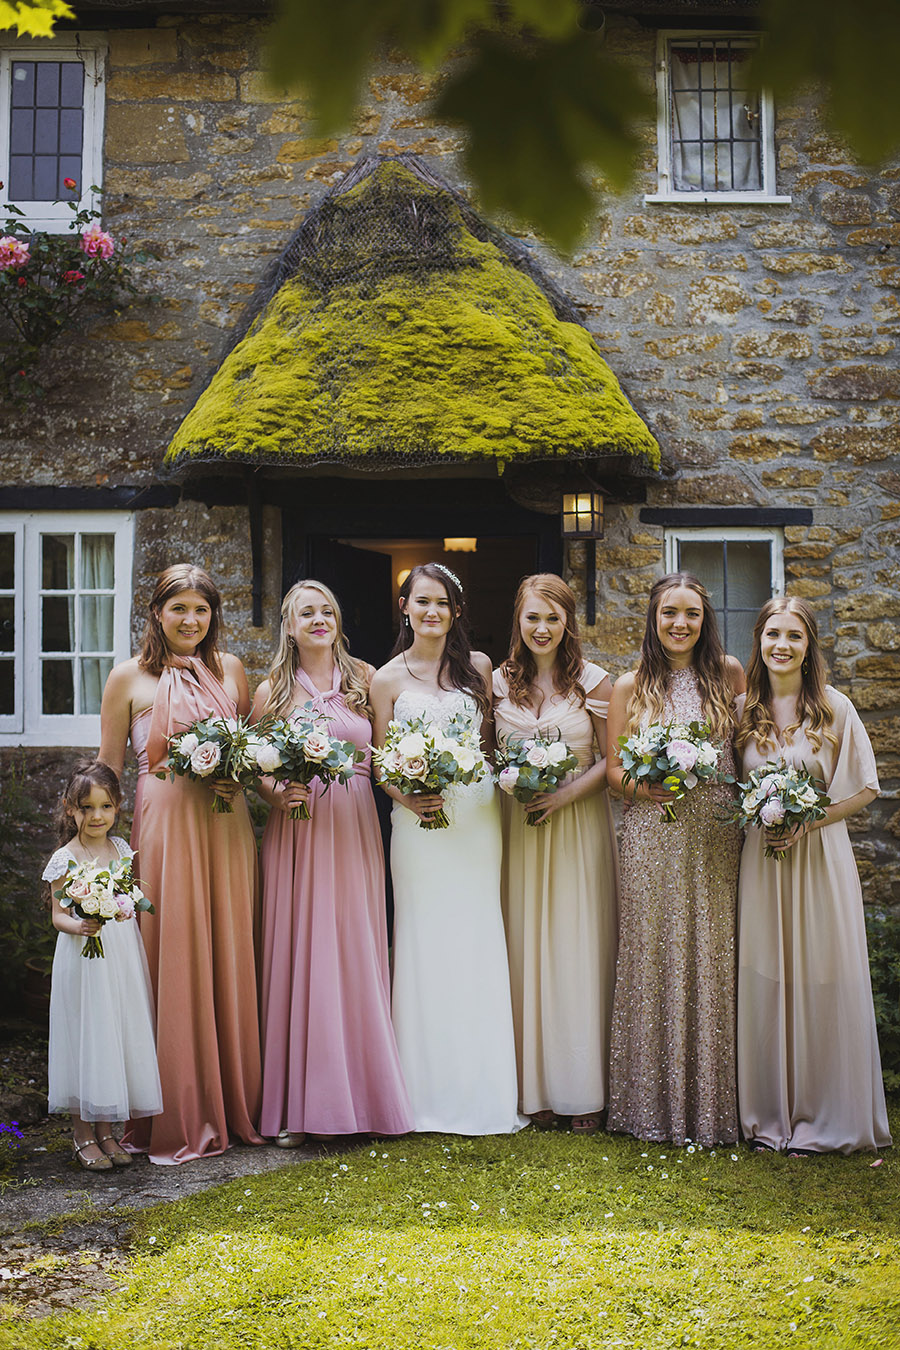 Relaxed outdoor wedding at Cott Farm Barn with images by Heather Birnie Photography on the English Wedding Blog (8)